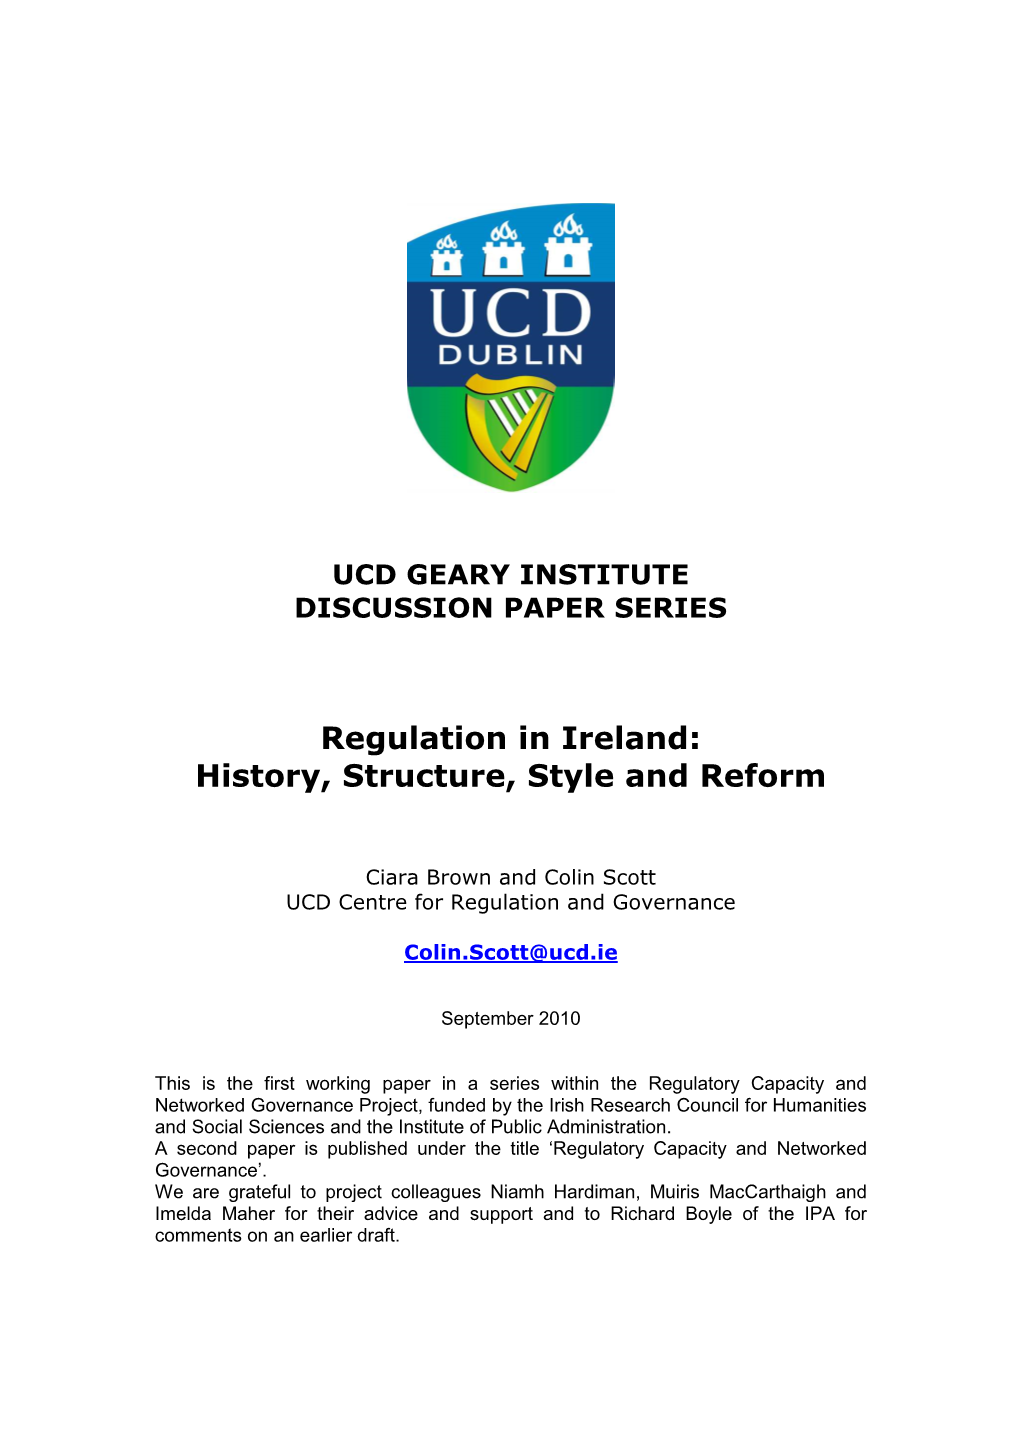 Regulation in Ireland: History, Structure, Style and Reform